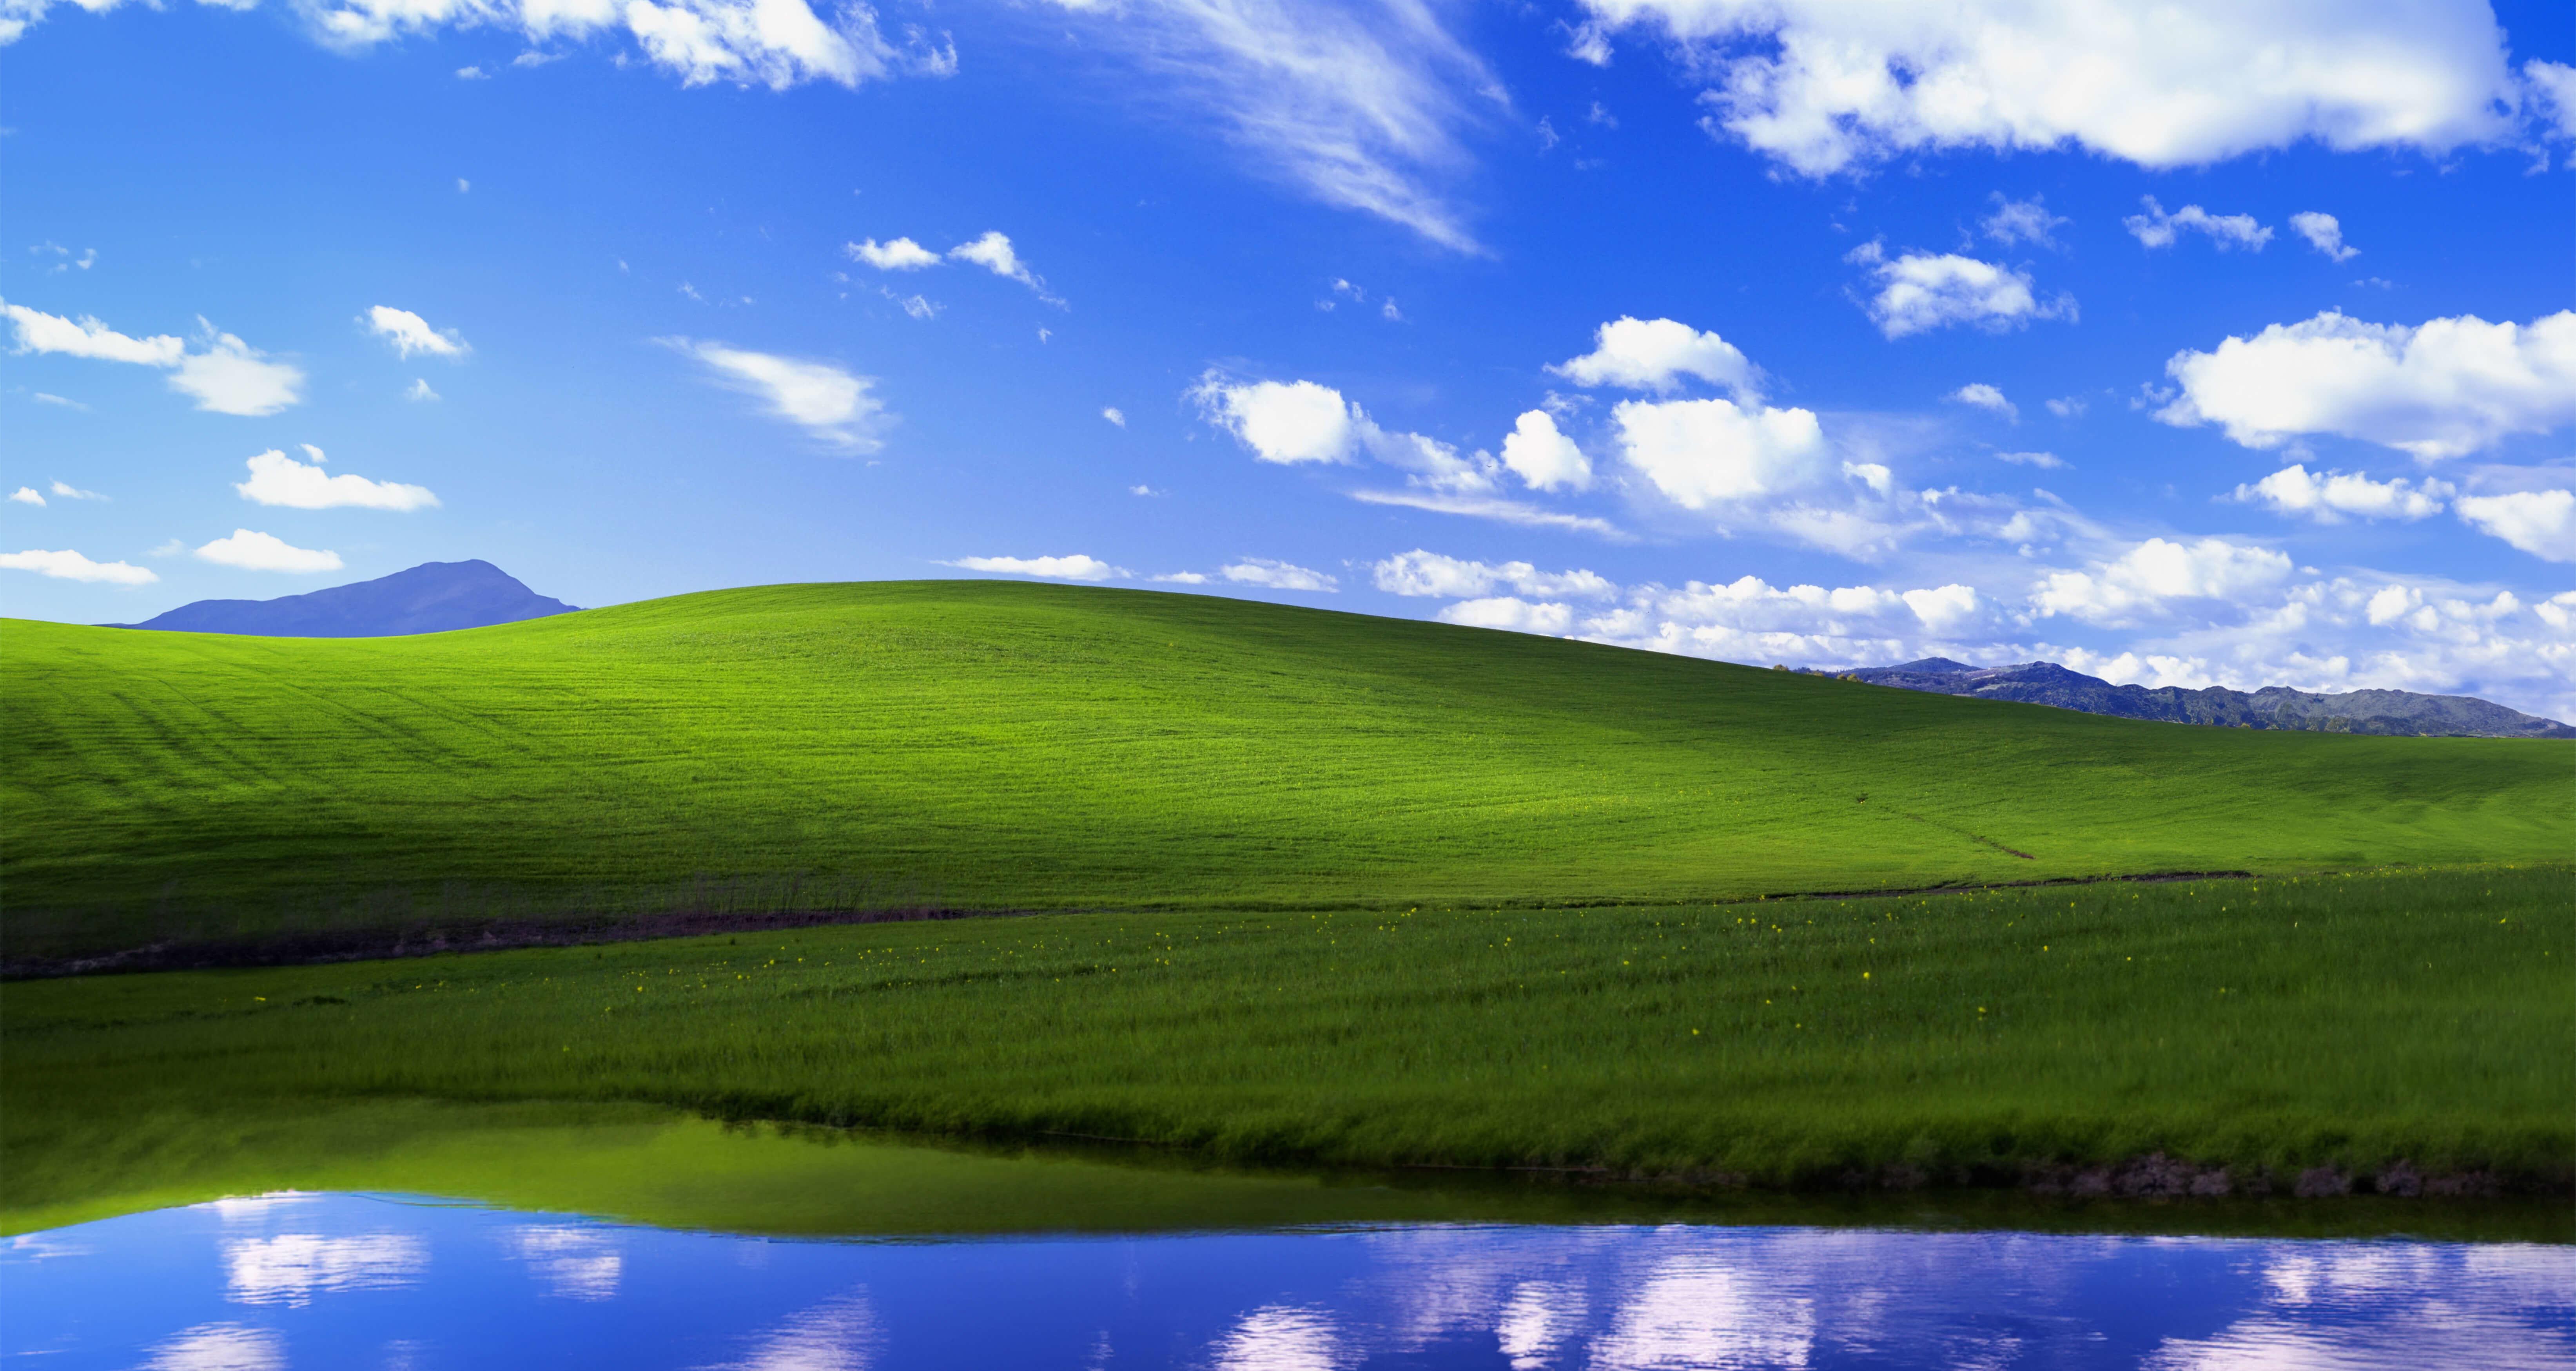 Check Out The Classic Windows Xp And Wallpaper With